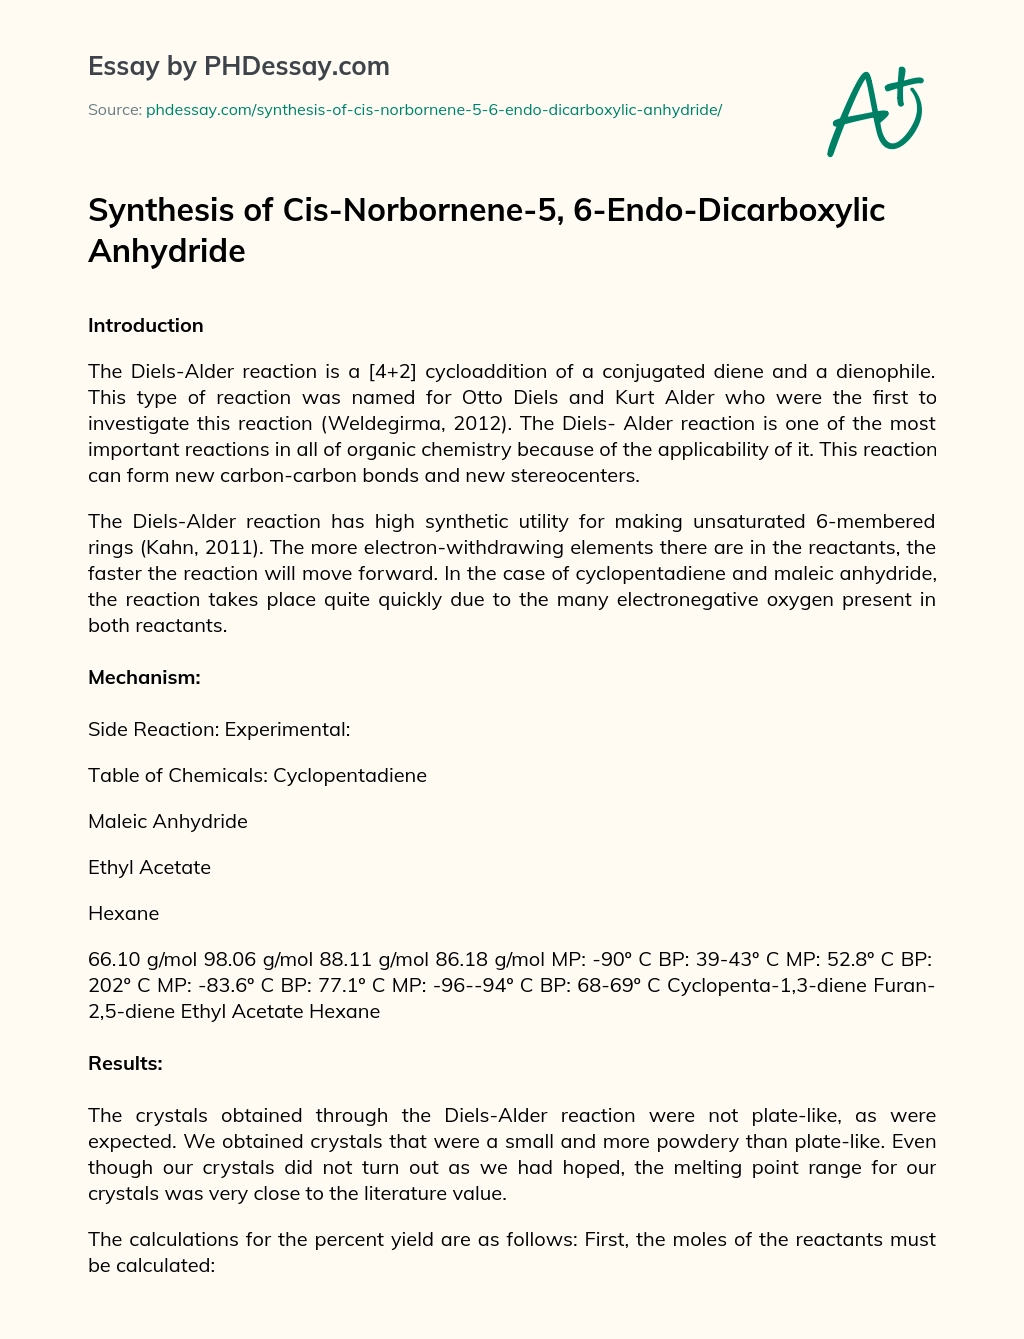 Synthesis of Cis-Norbornene-5, 6-Endo-Dicarboxylic Anhydride essay